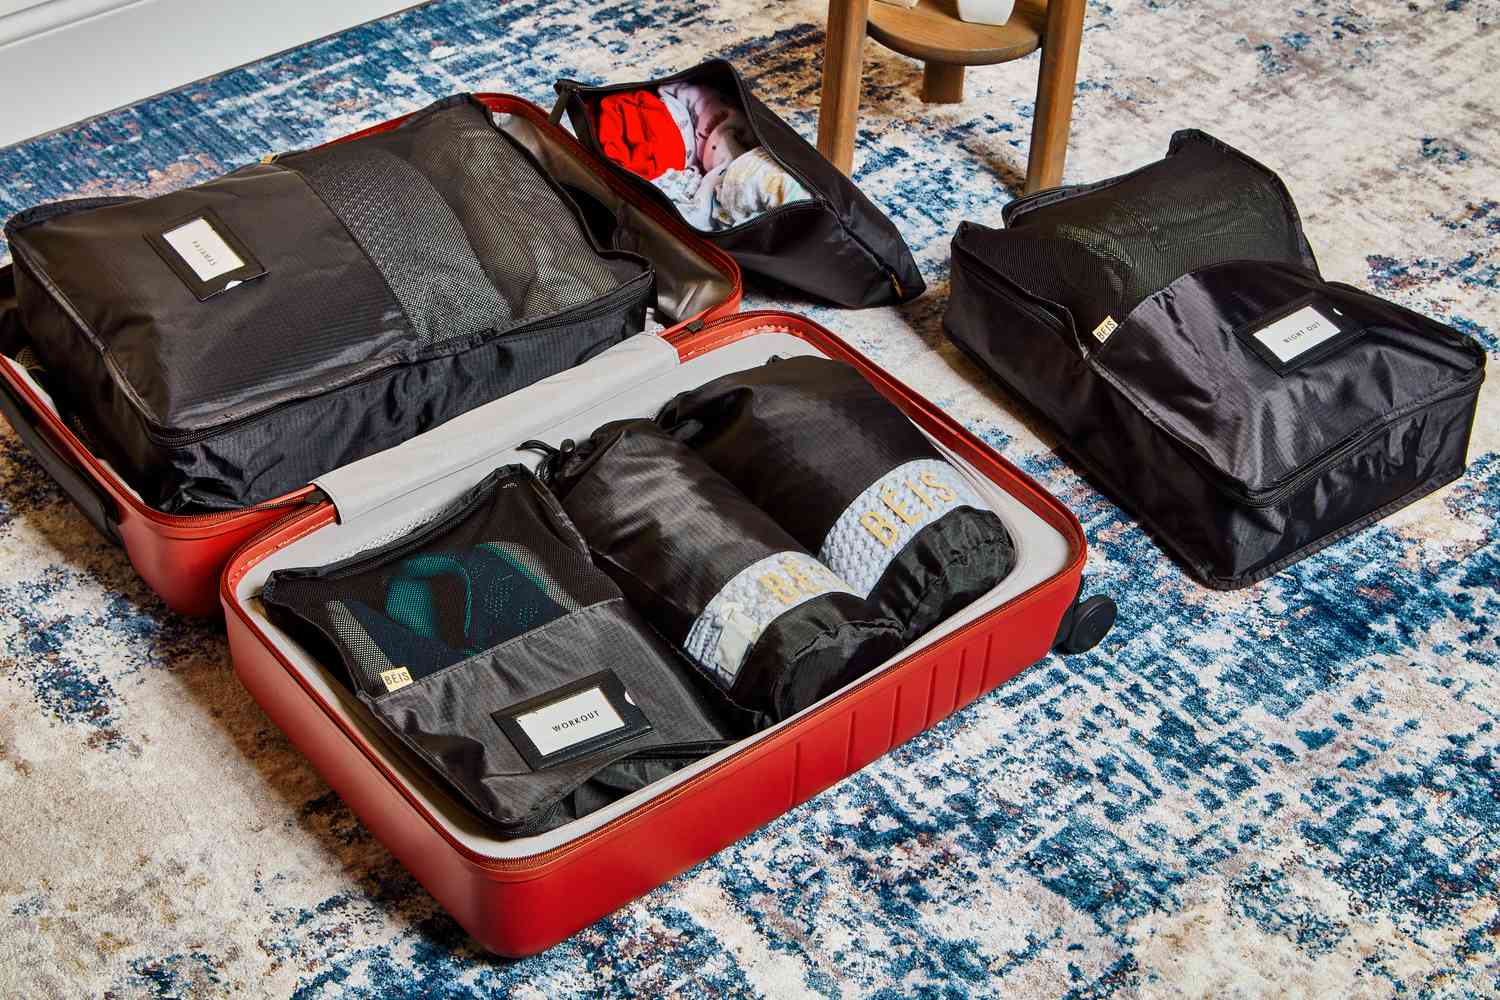 Béis The Packing Cubes inside red suitcase on carpet